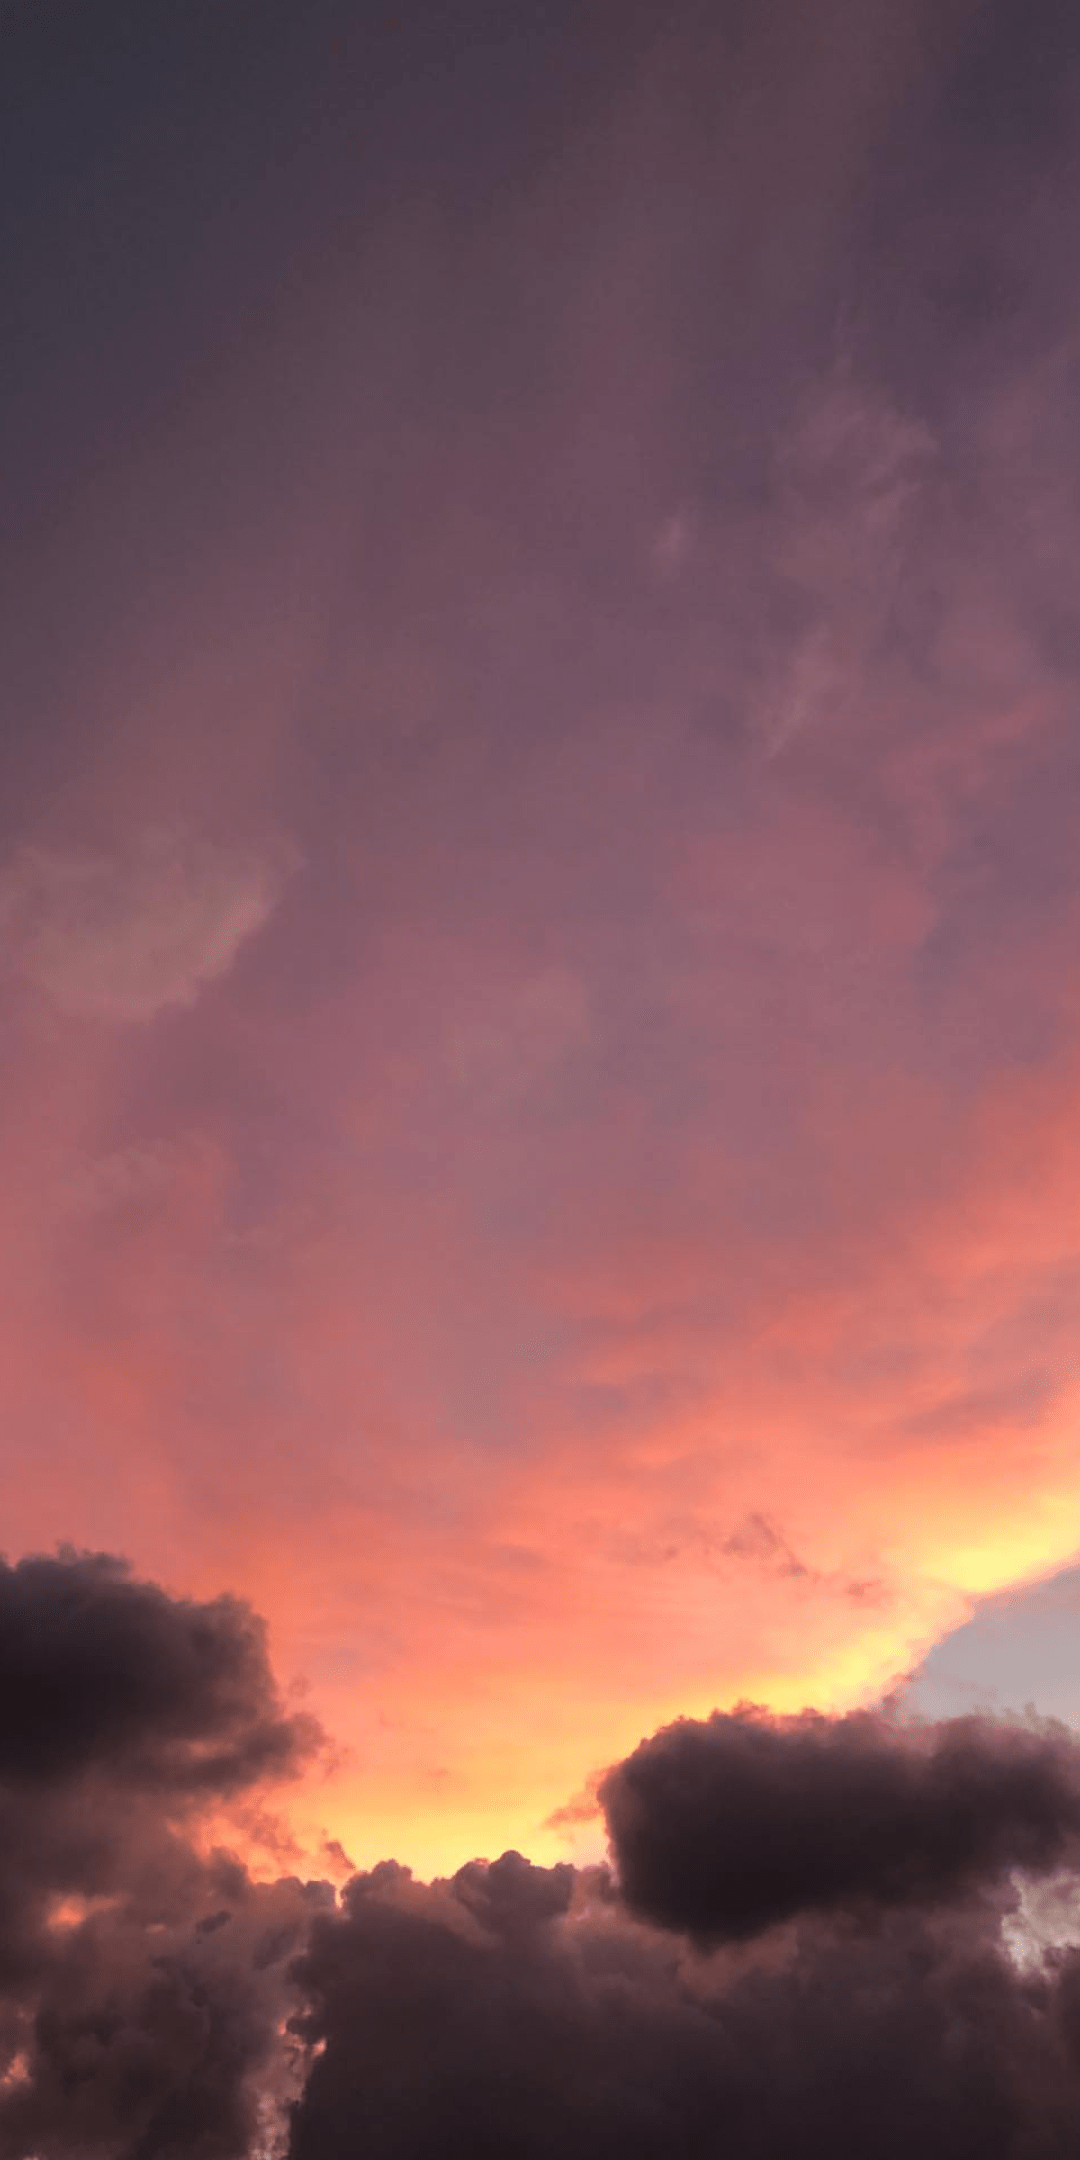 A sky with clouds during sunset - Sky